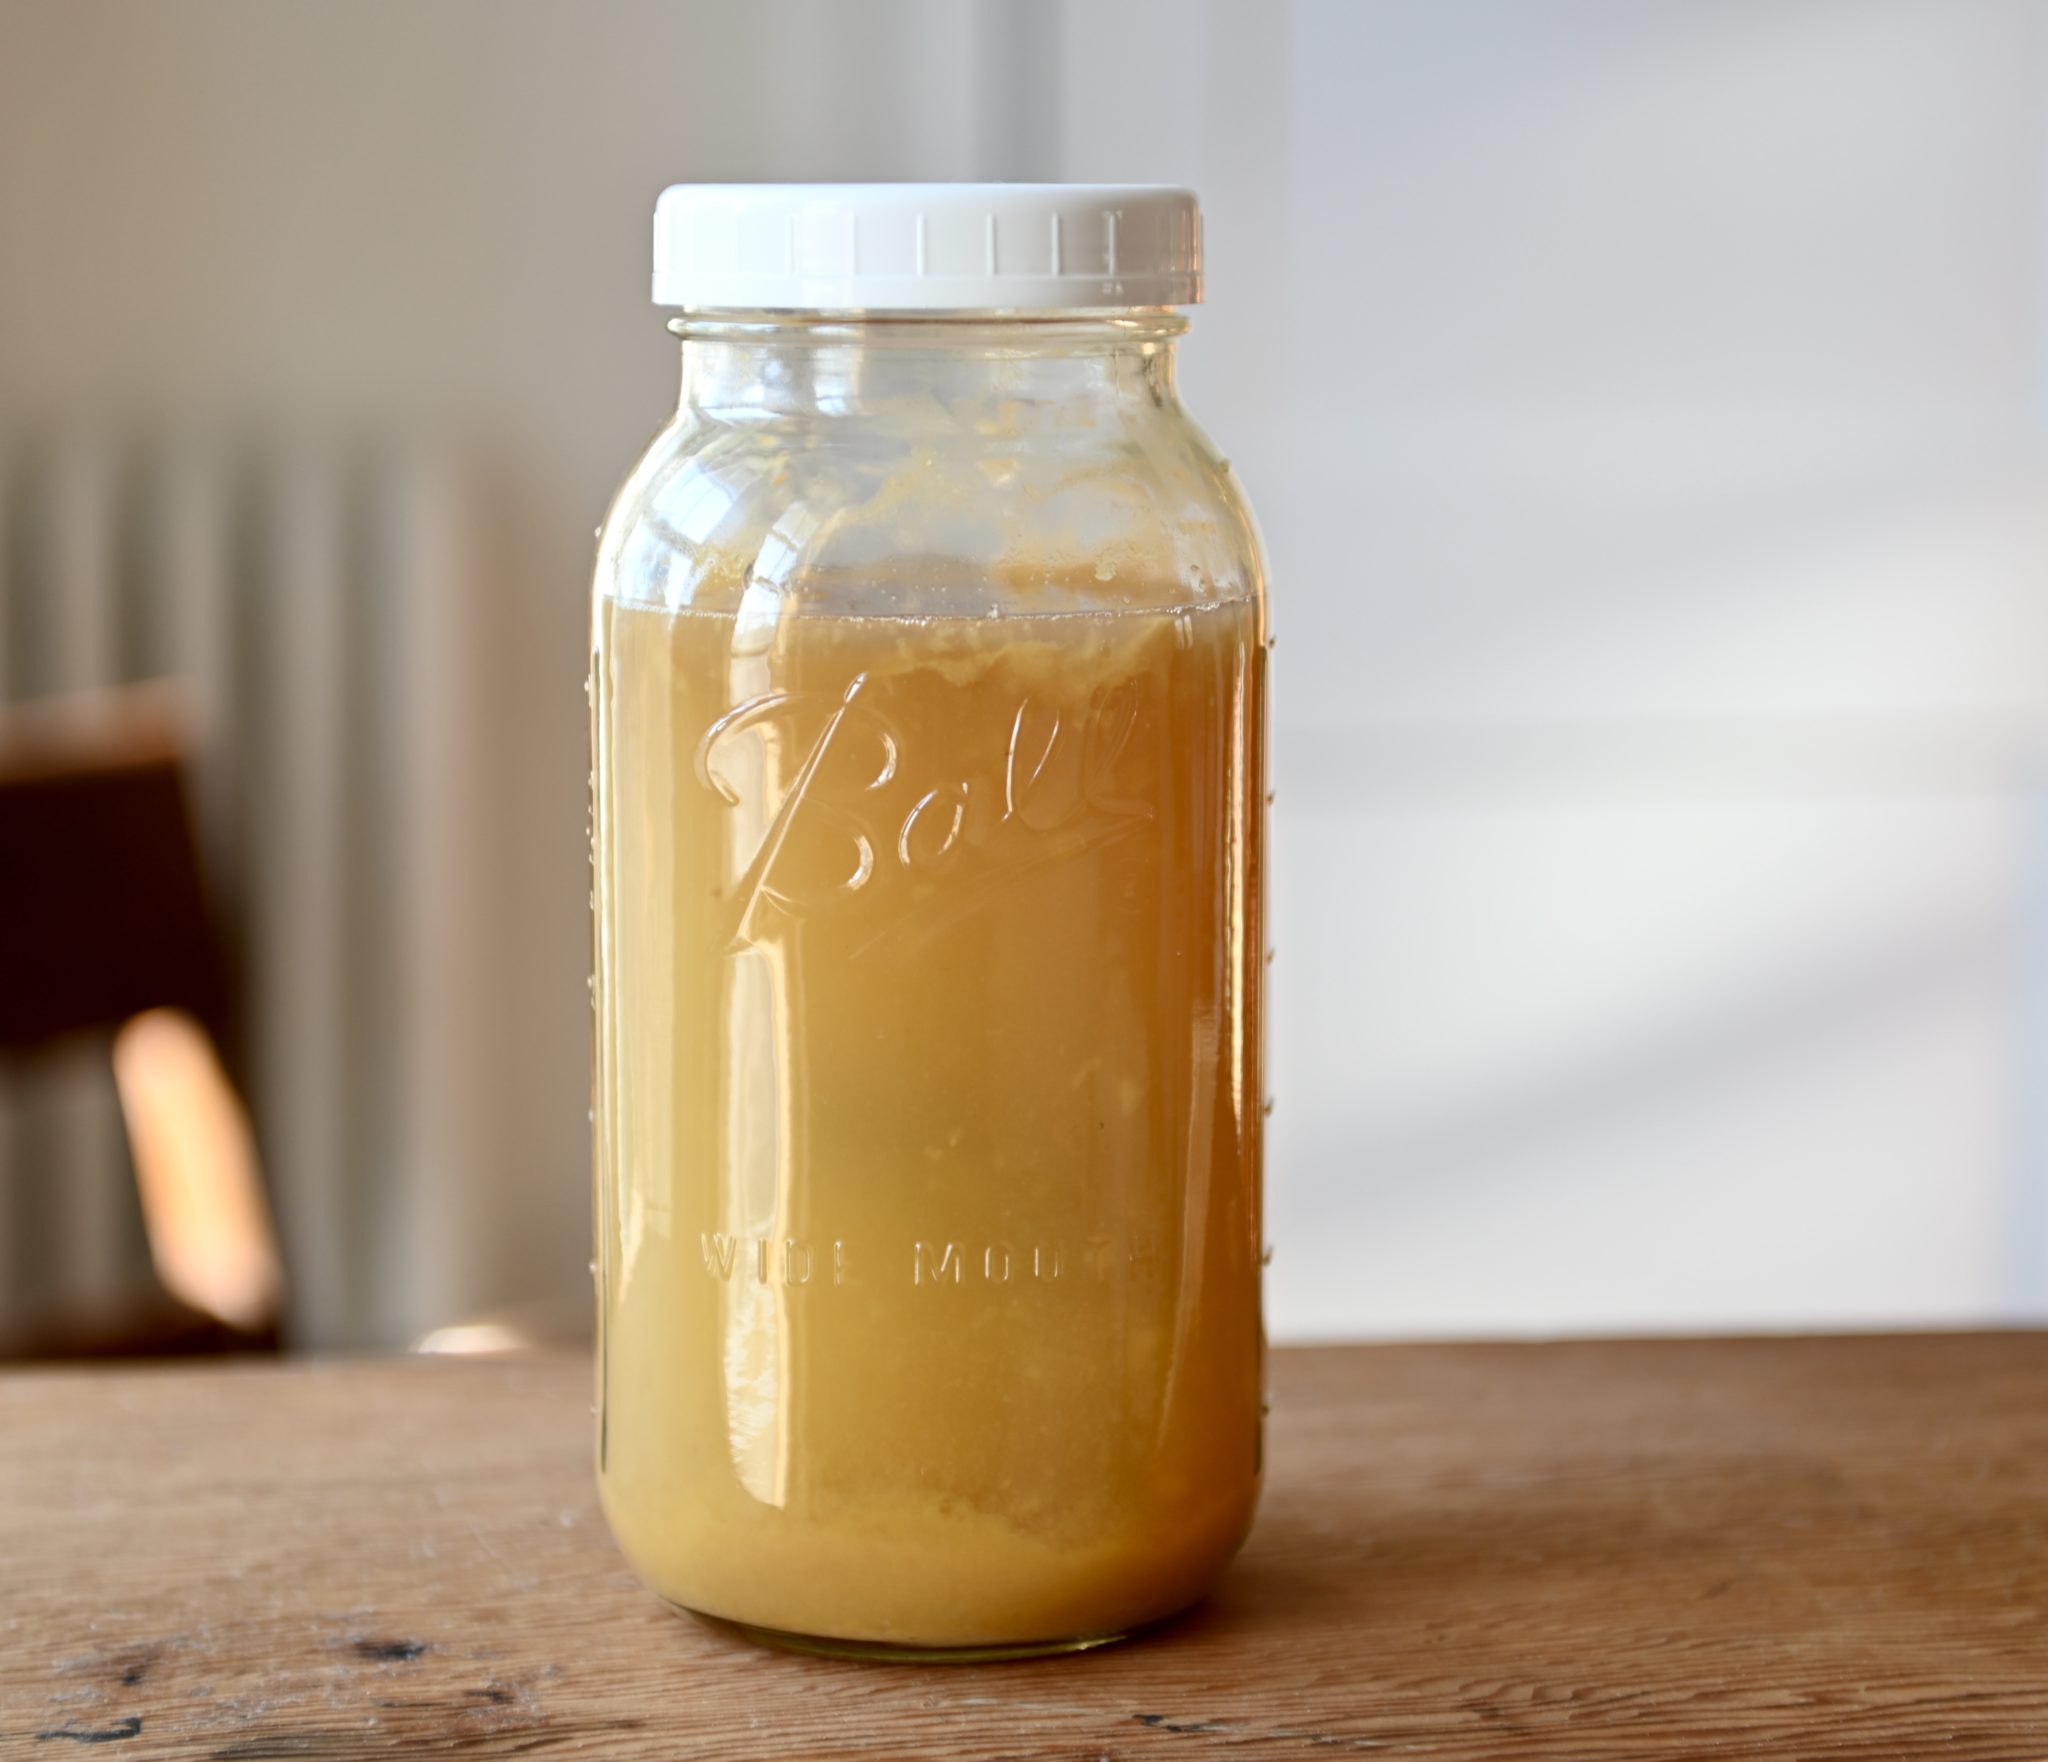 add the mother to fresh-squeezed apple juice